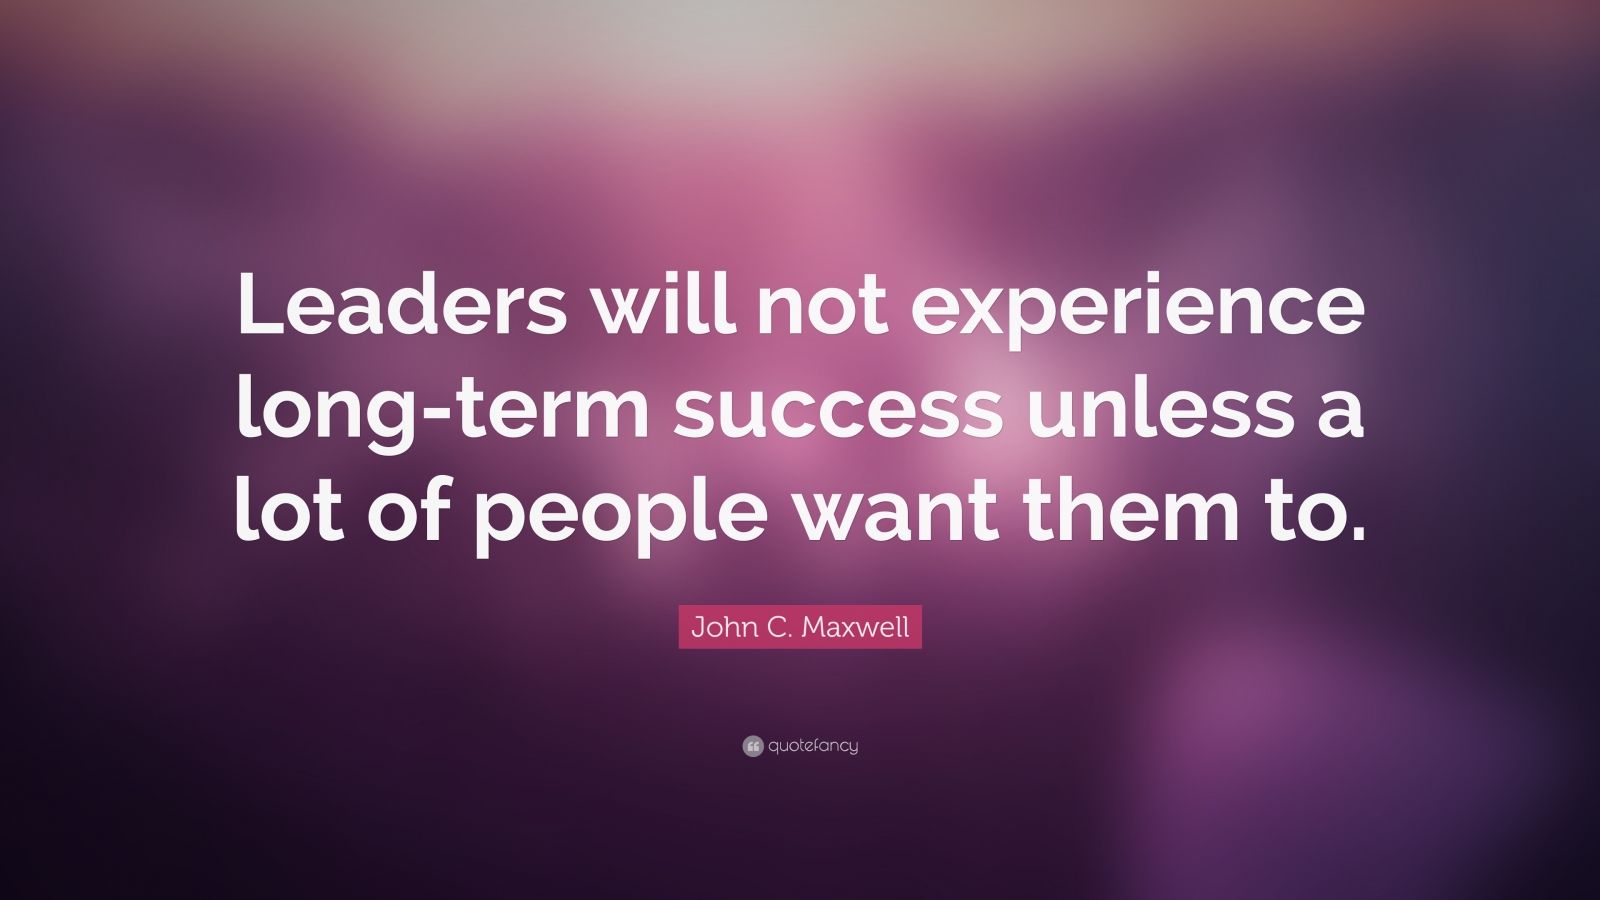 John C. Maxwell Quote: “Leaders will not experience long-term success ...